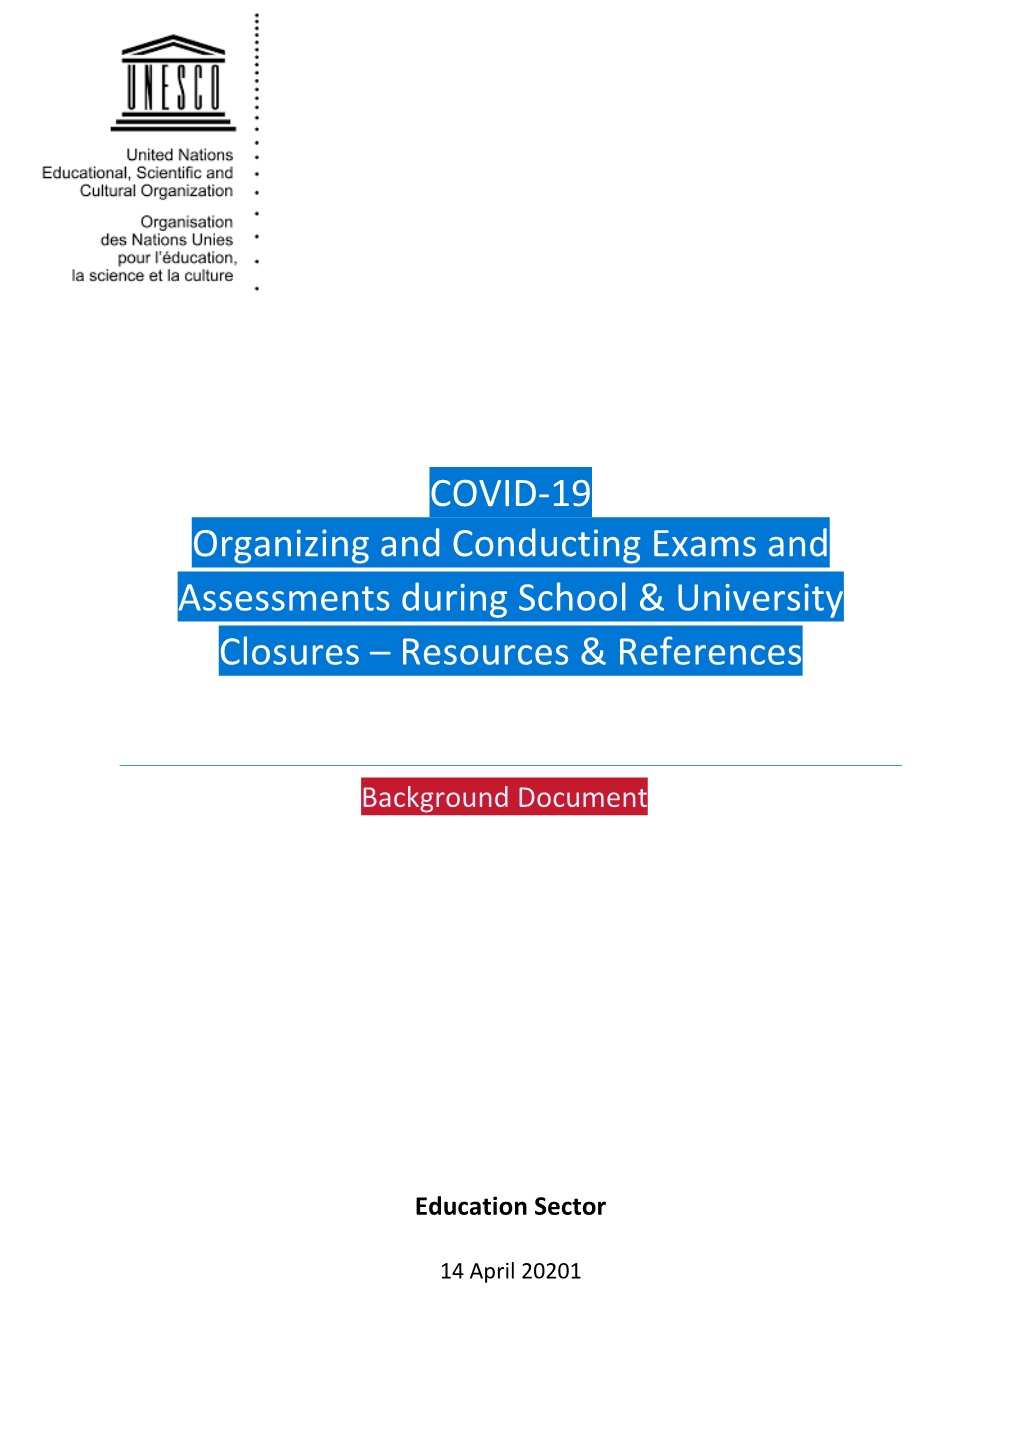 COVID-19 Organizing and Conducting Exams and Assessments During School & University Closures – Resources & References